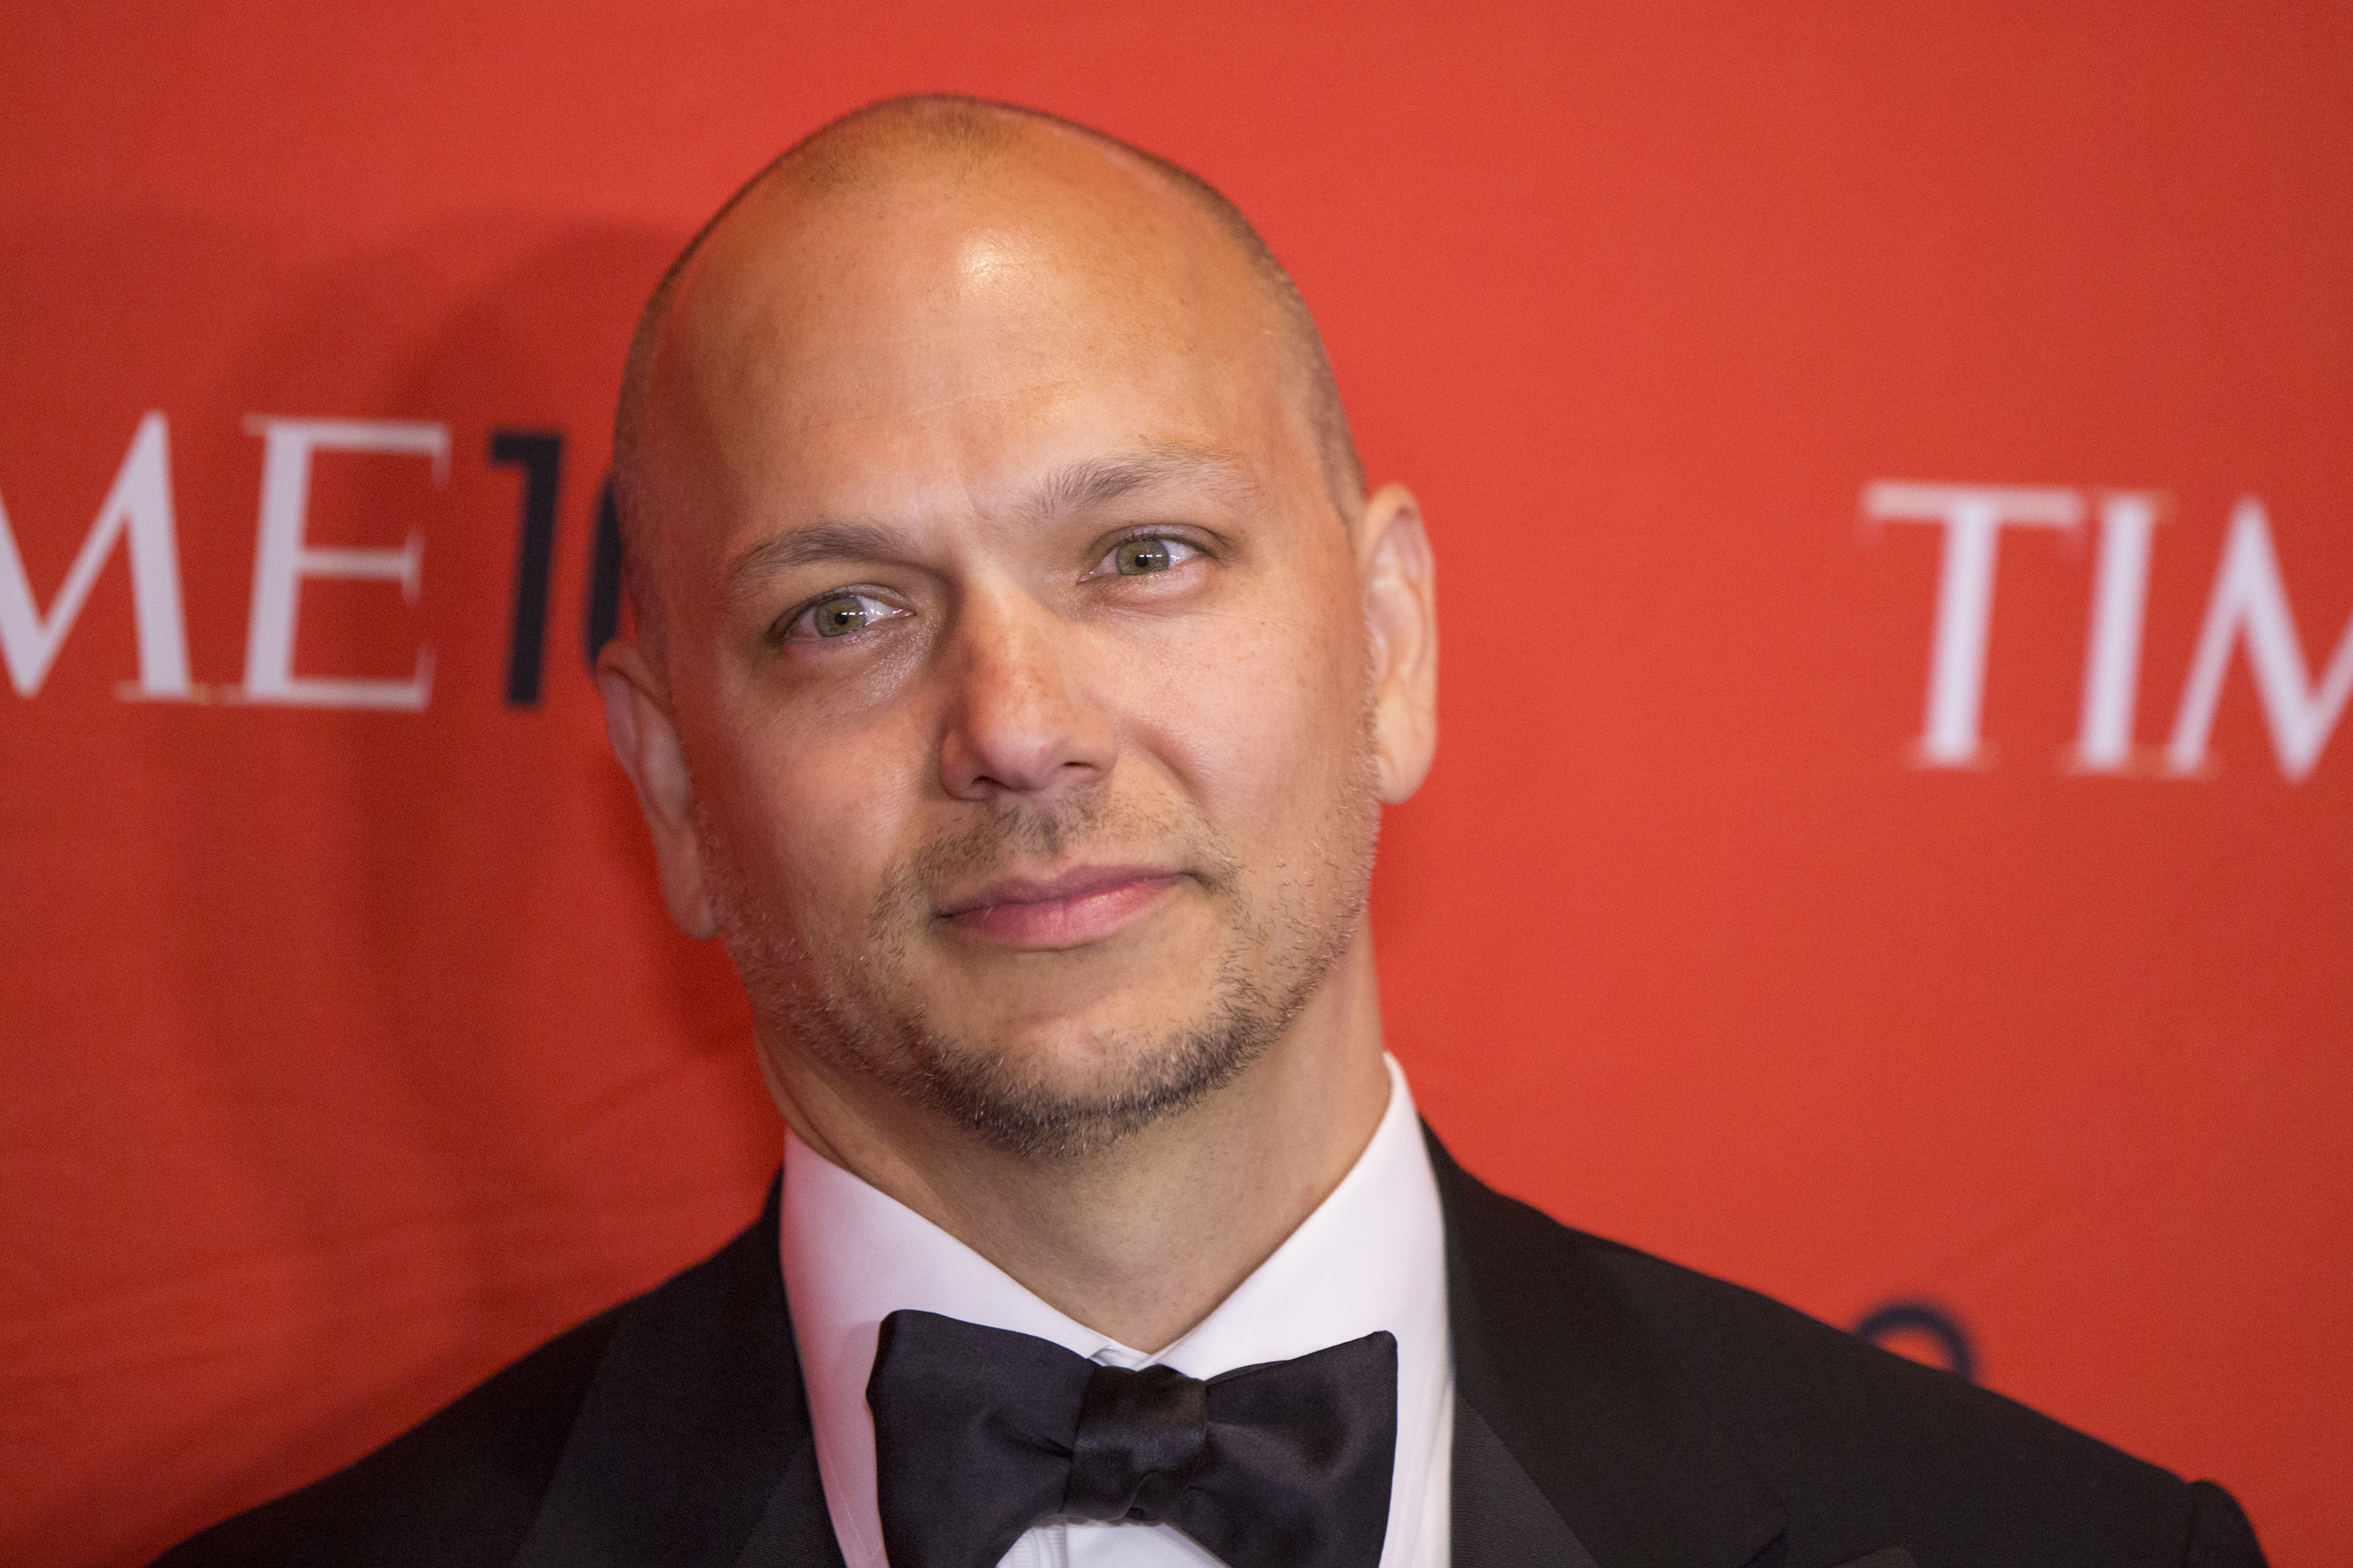 Fadell arrives at the Time 100 gala celebrating the magazine's naming of the 100 most influential people in the world for the past year in New York